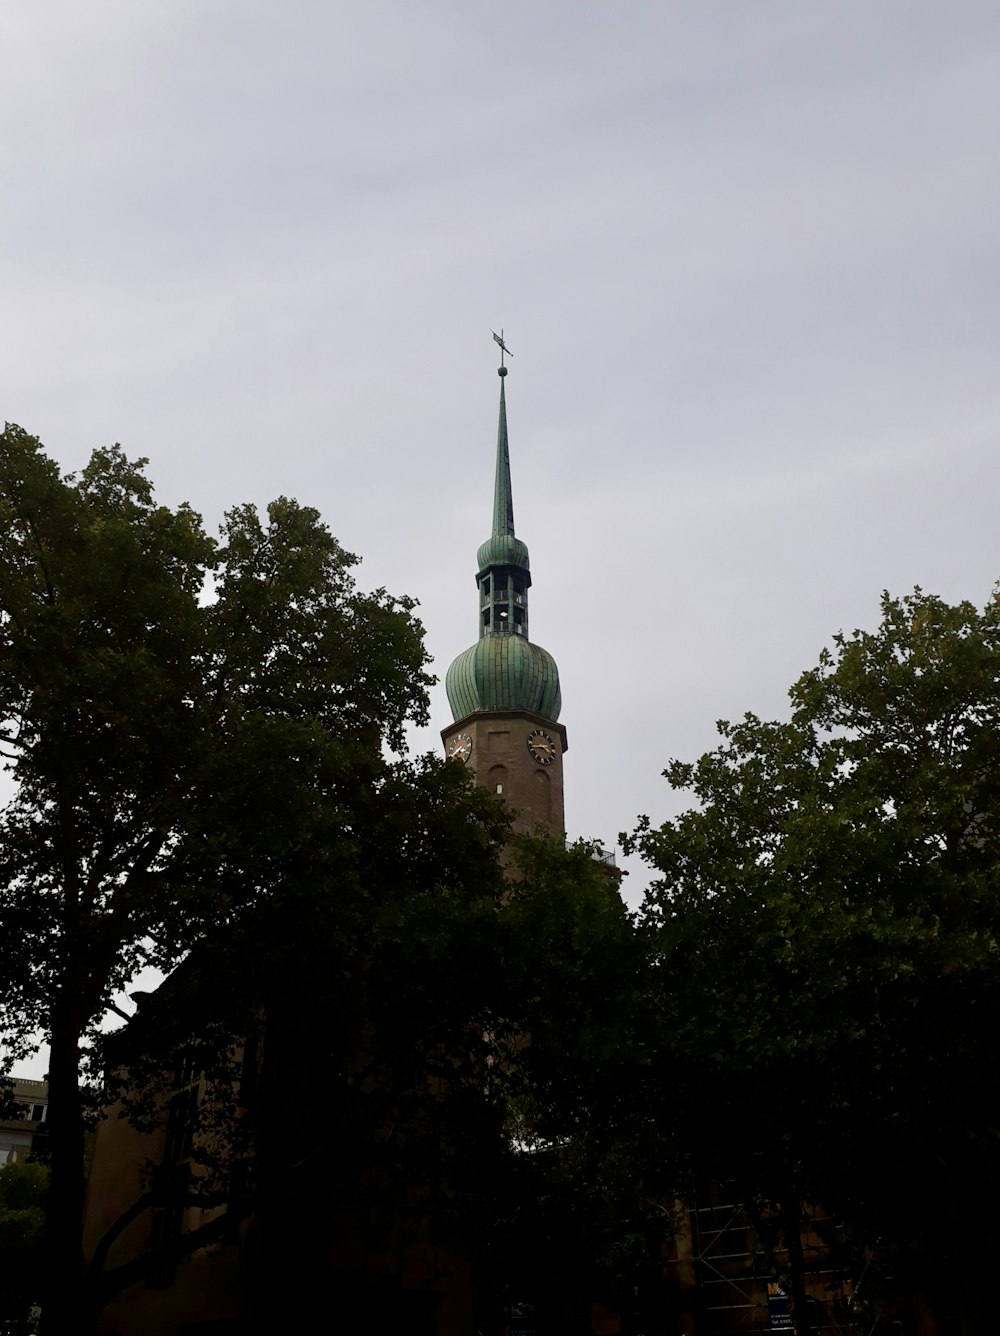 a church steeple with a green steeple on top